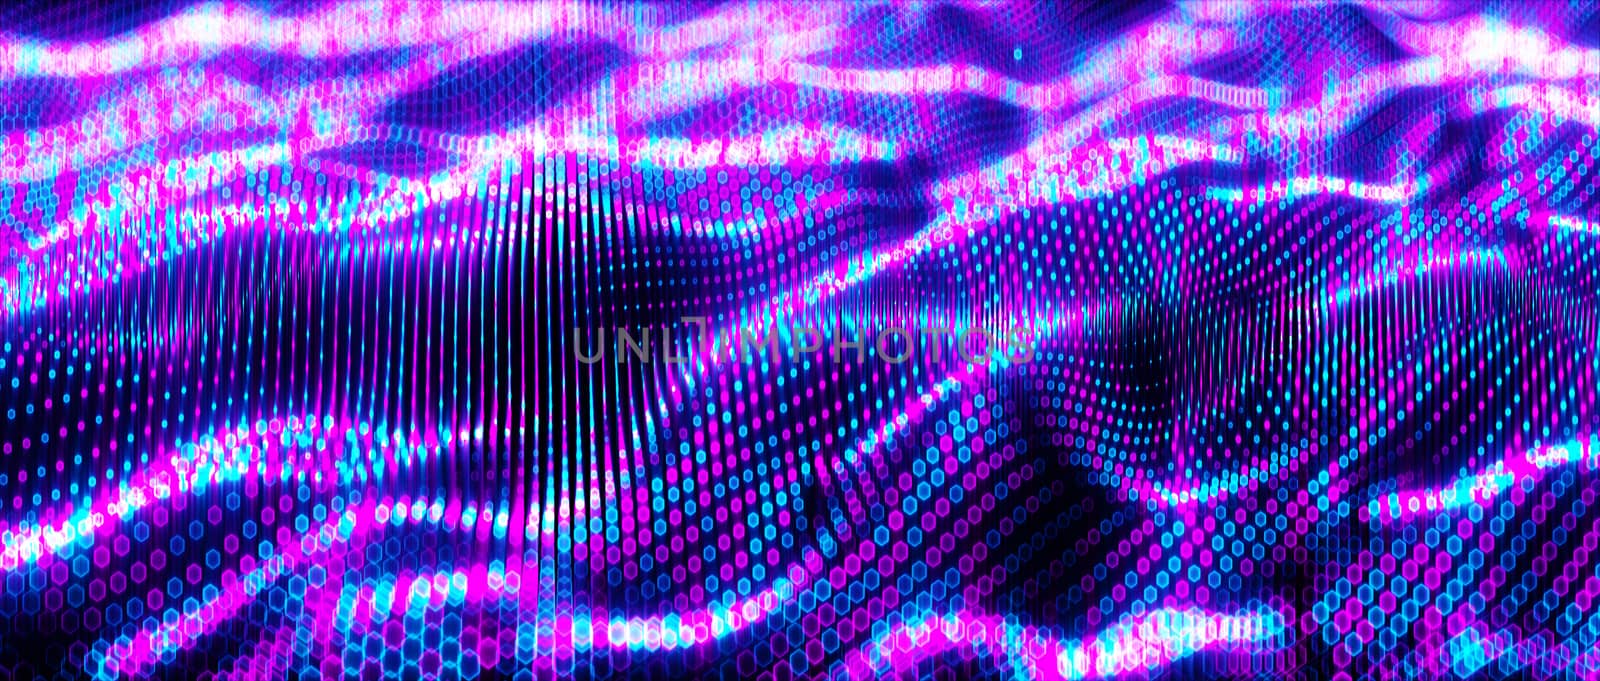 Abstract big data futuristic light wallpaper background design. Science dark pattern with structure mesh and circles. Modern business space dots illustration with bokeh. 3D render by Shanvood